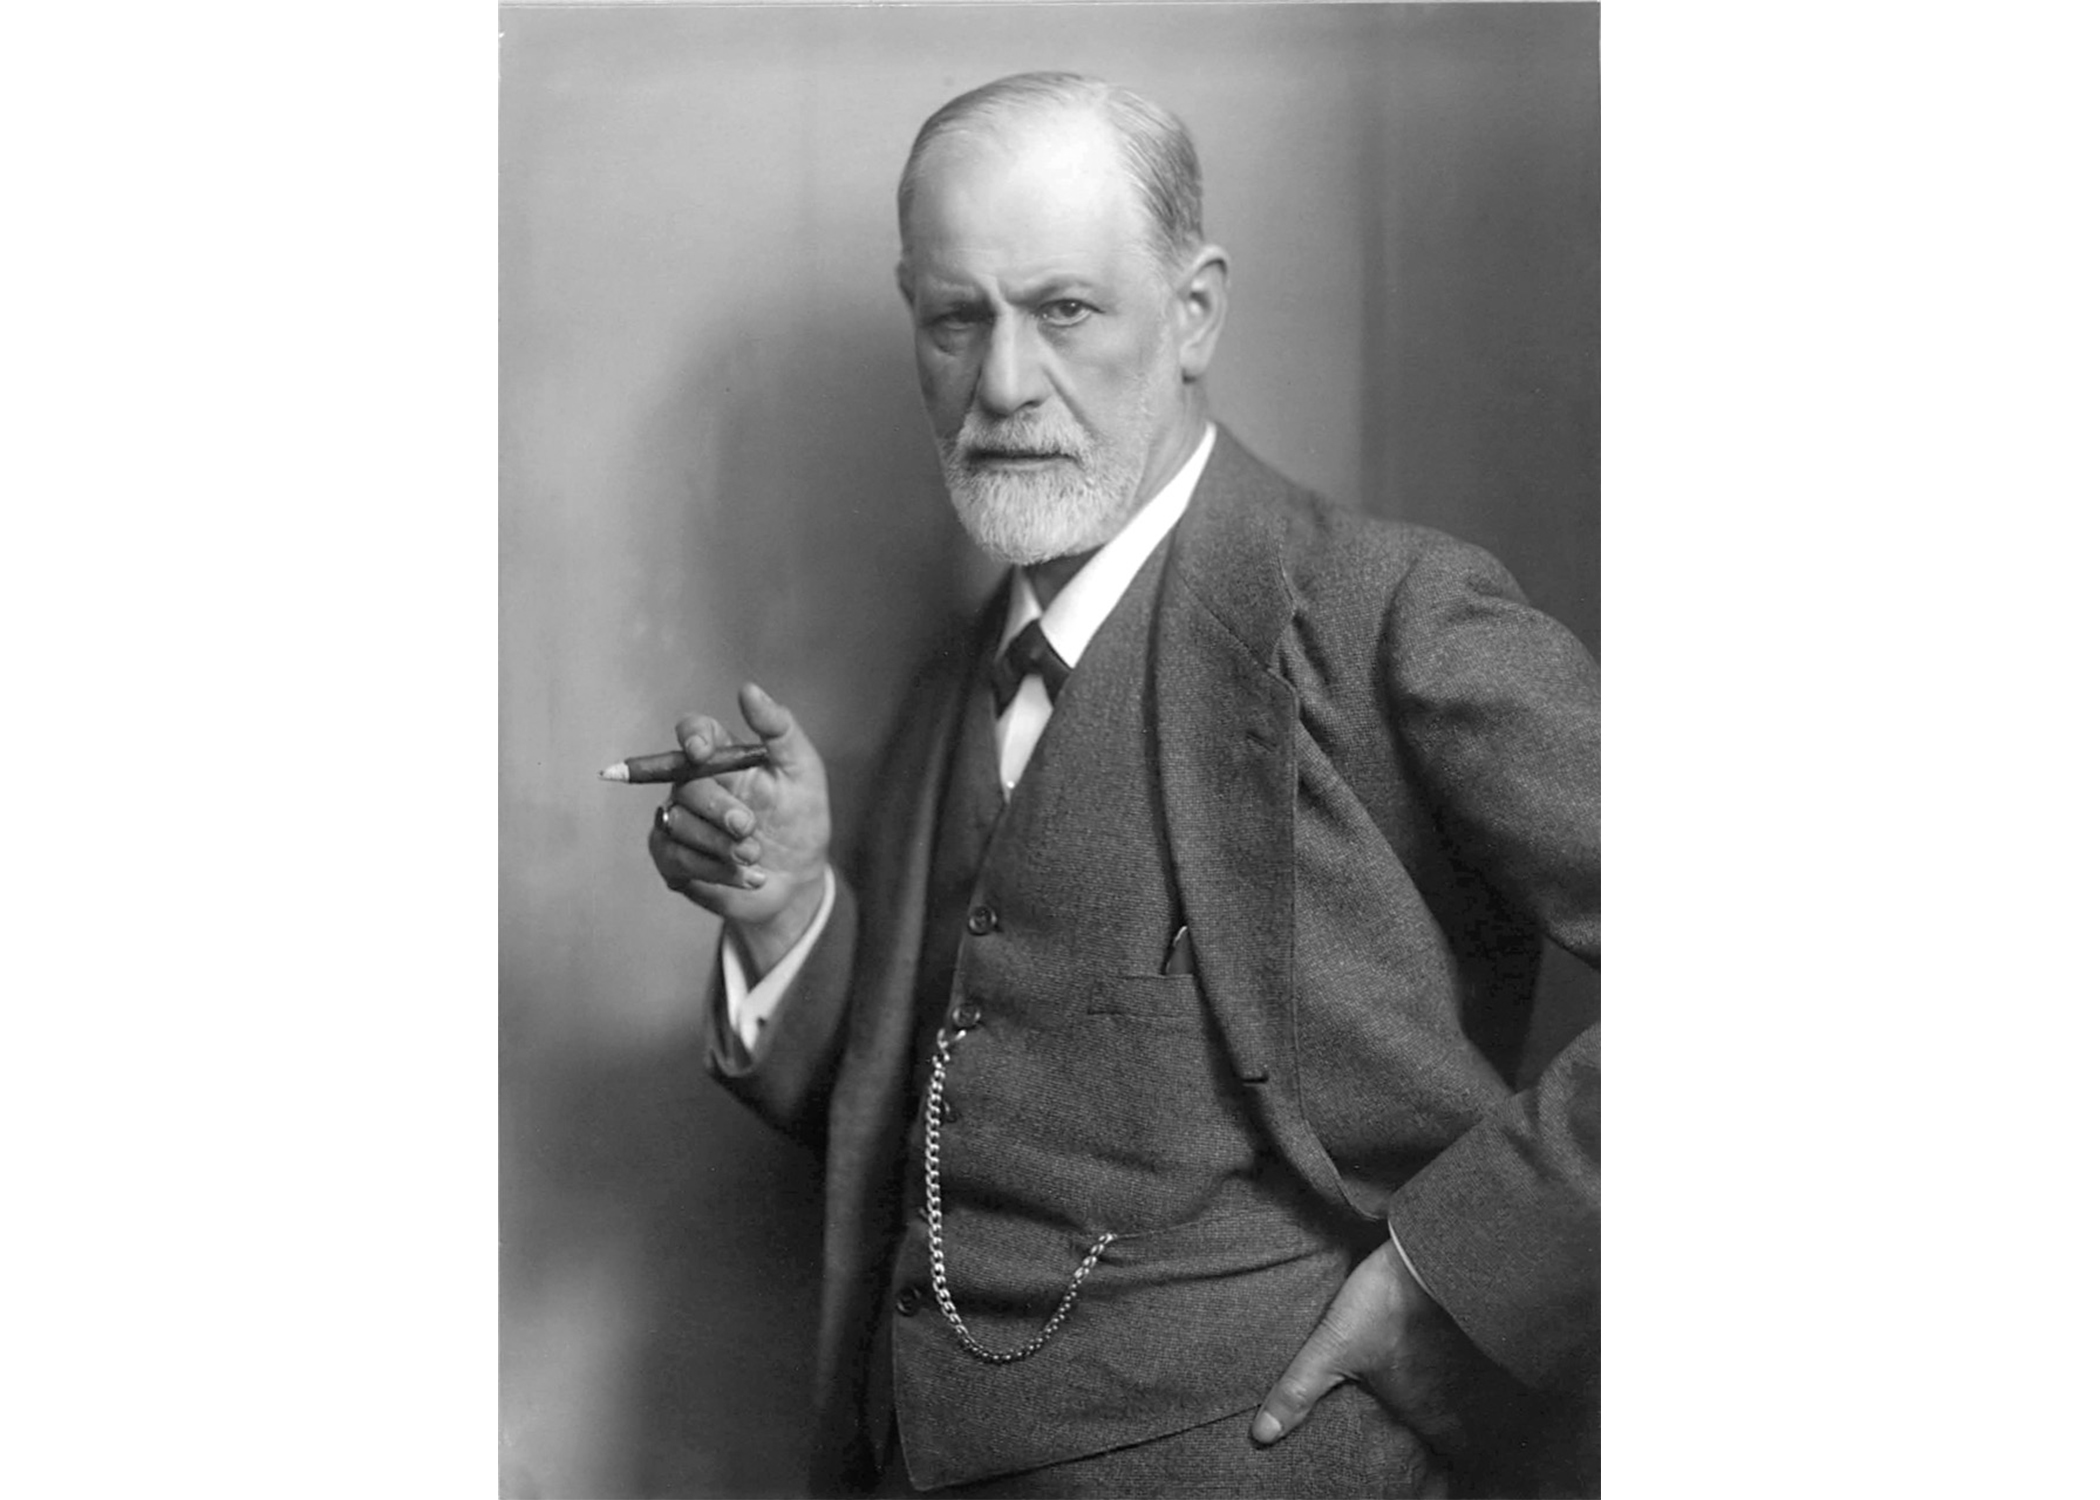 Sigmund Freud: Everything you always wanted to know about but were afraid to ask